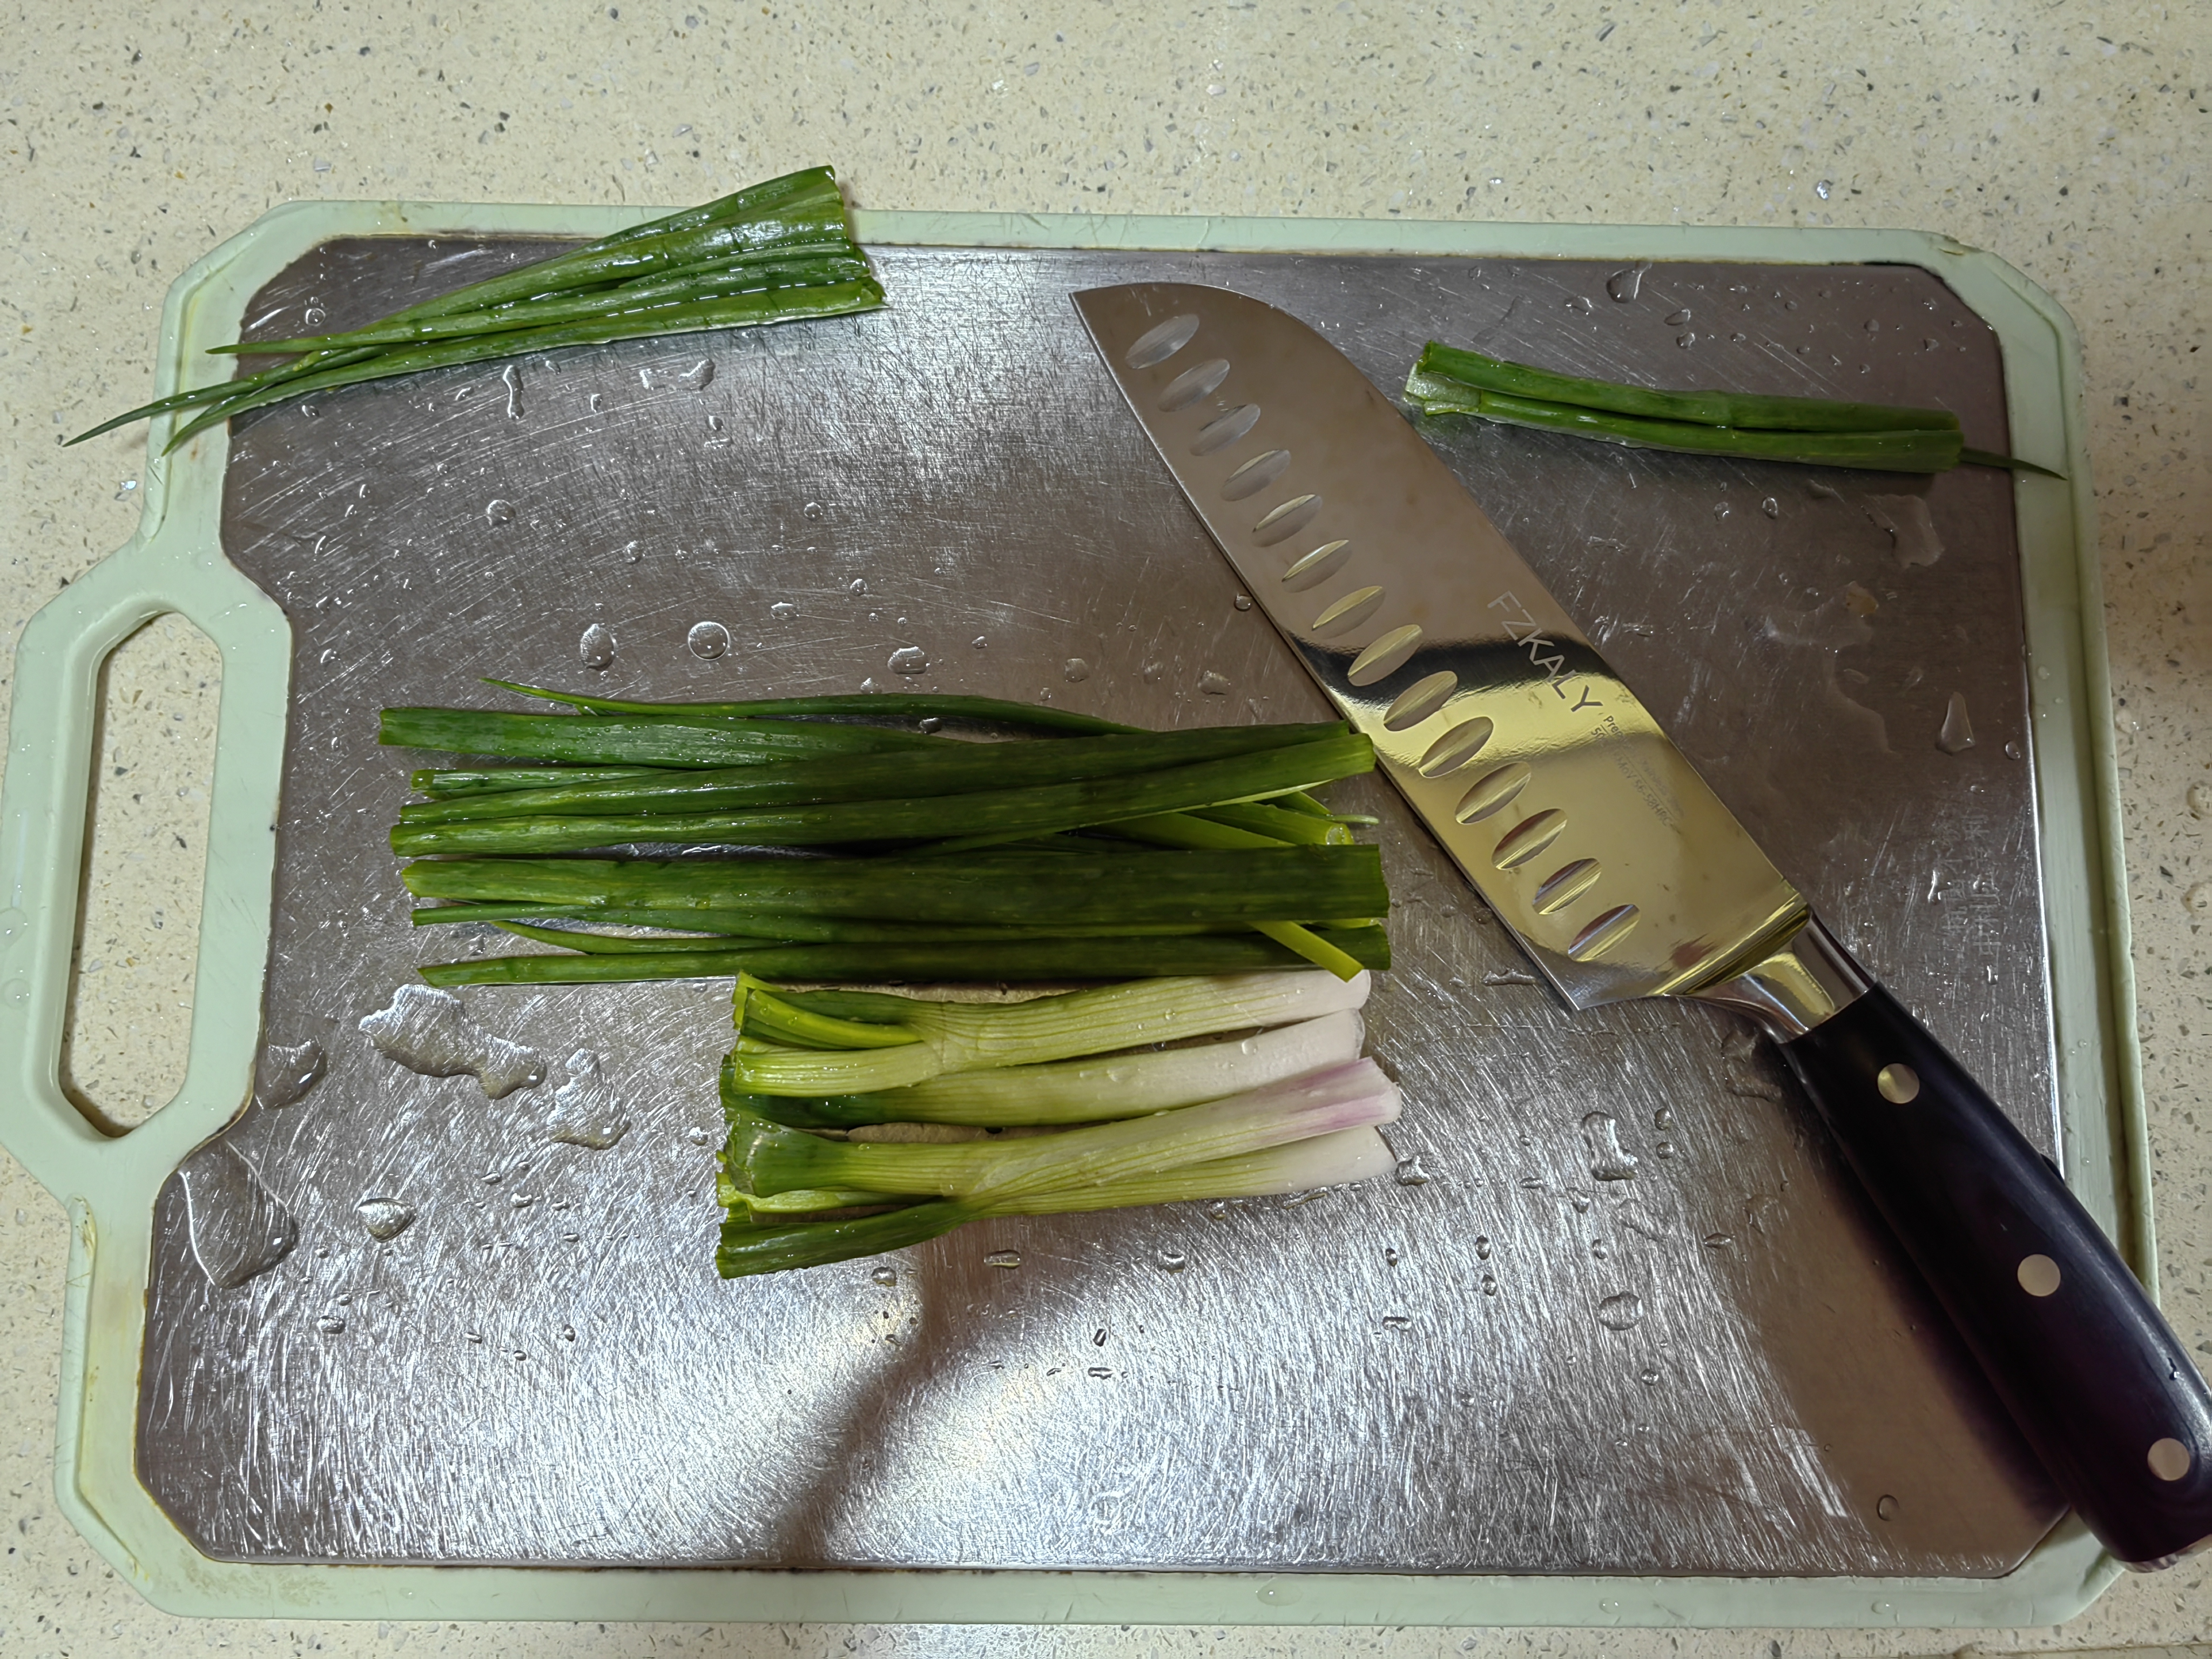 How To Chop Green Onions 